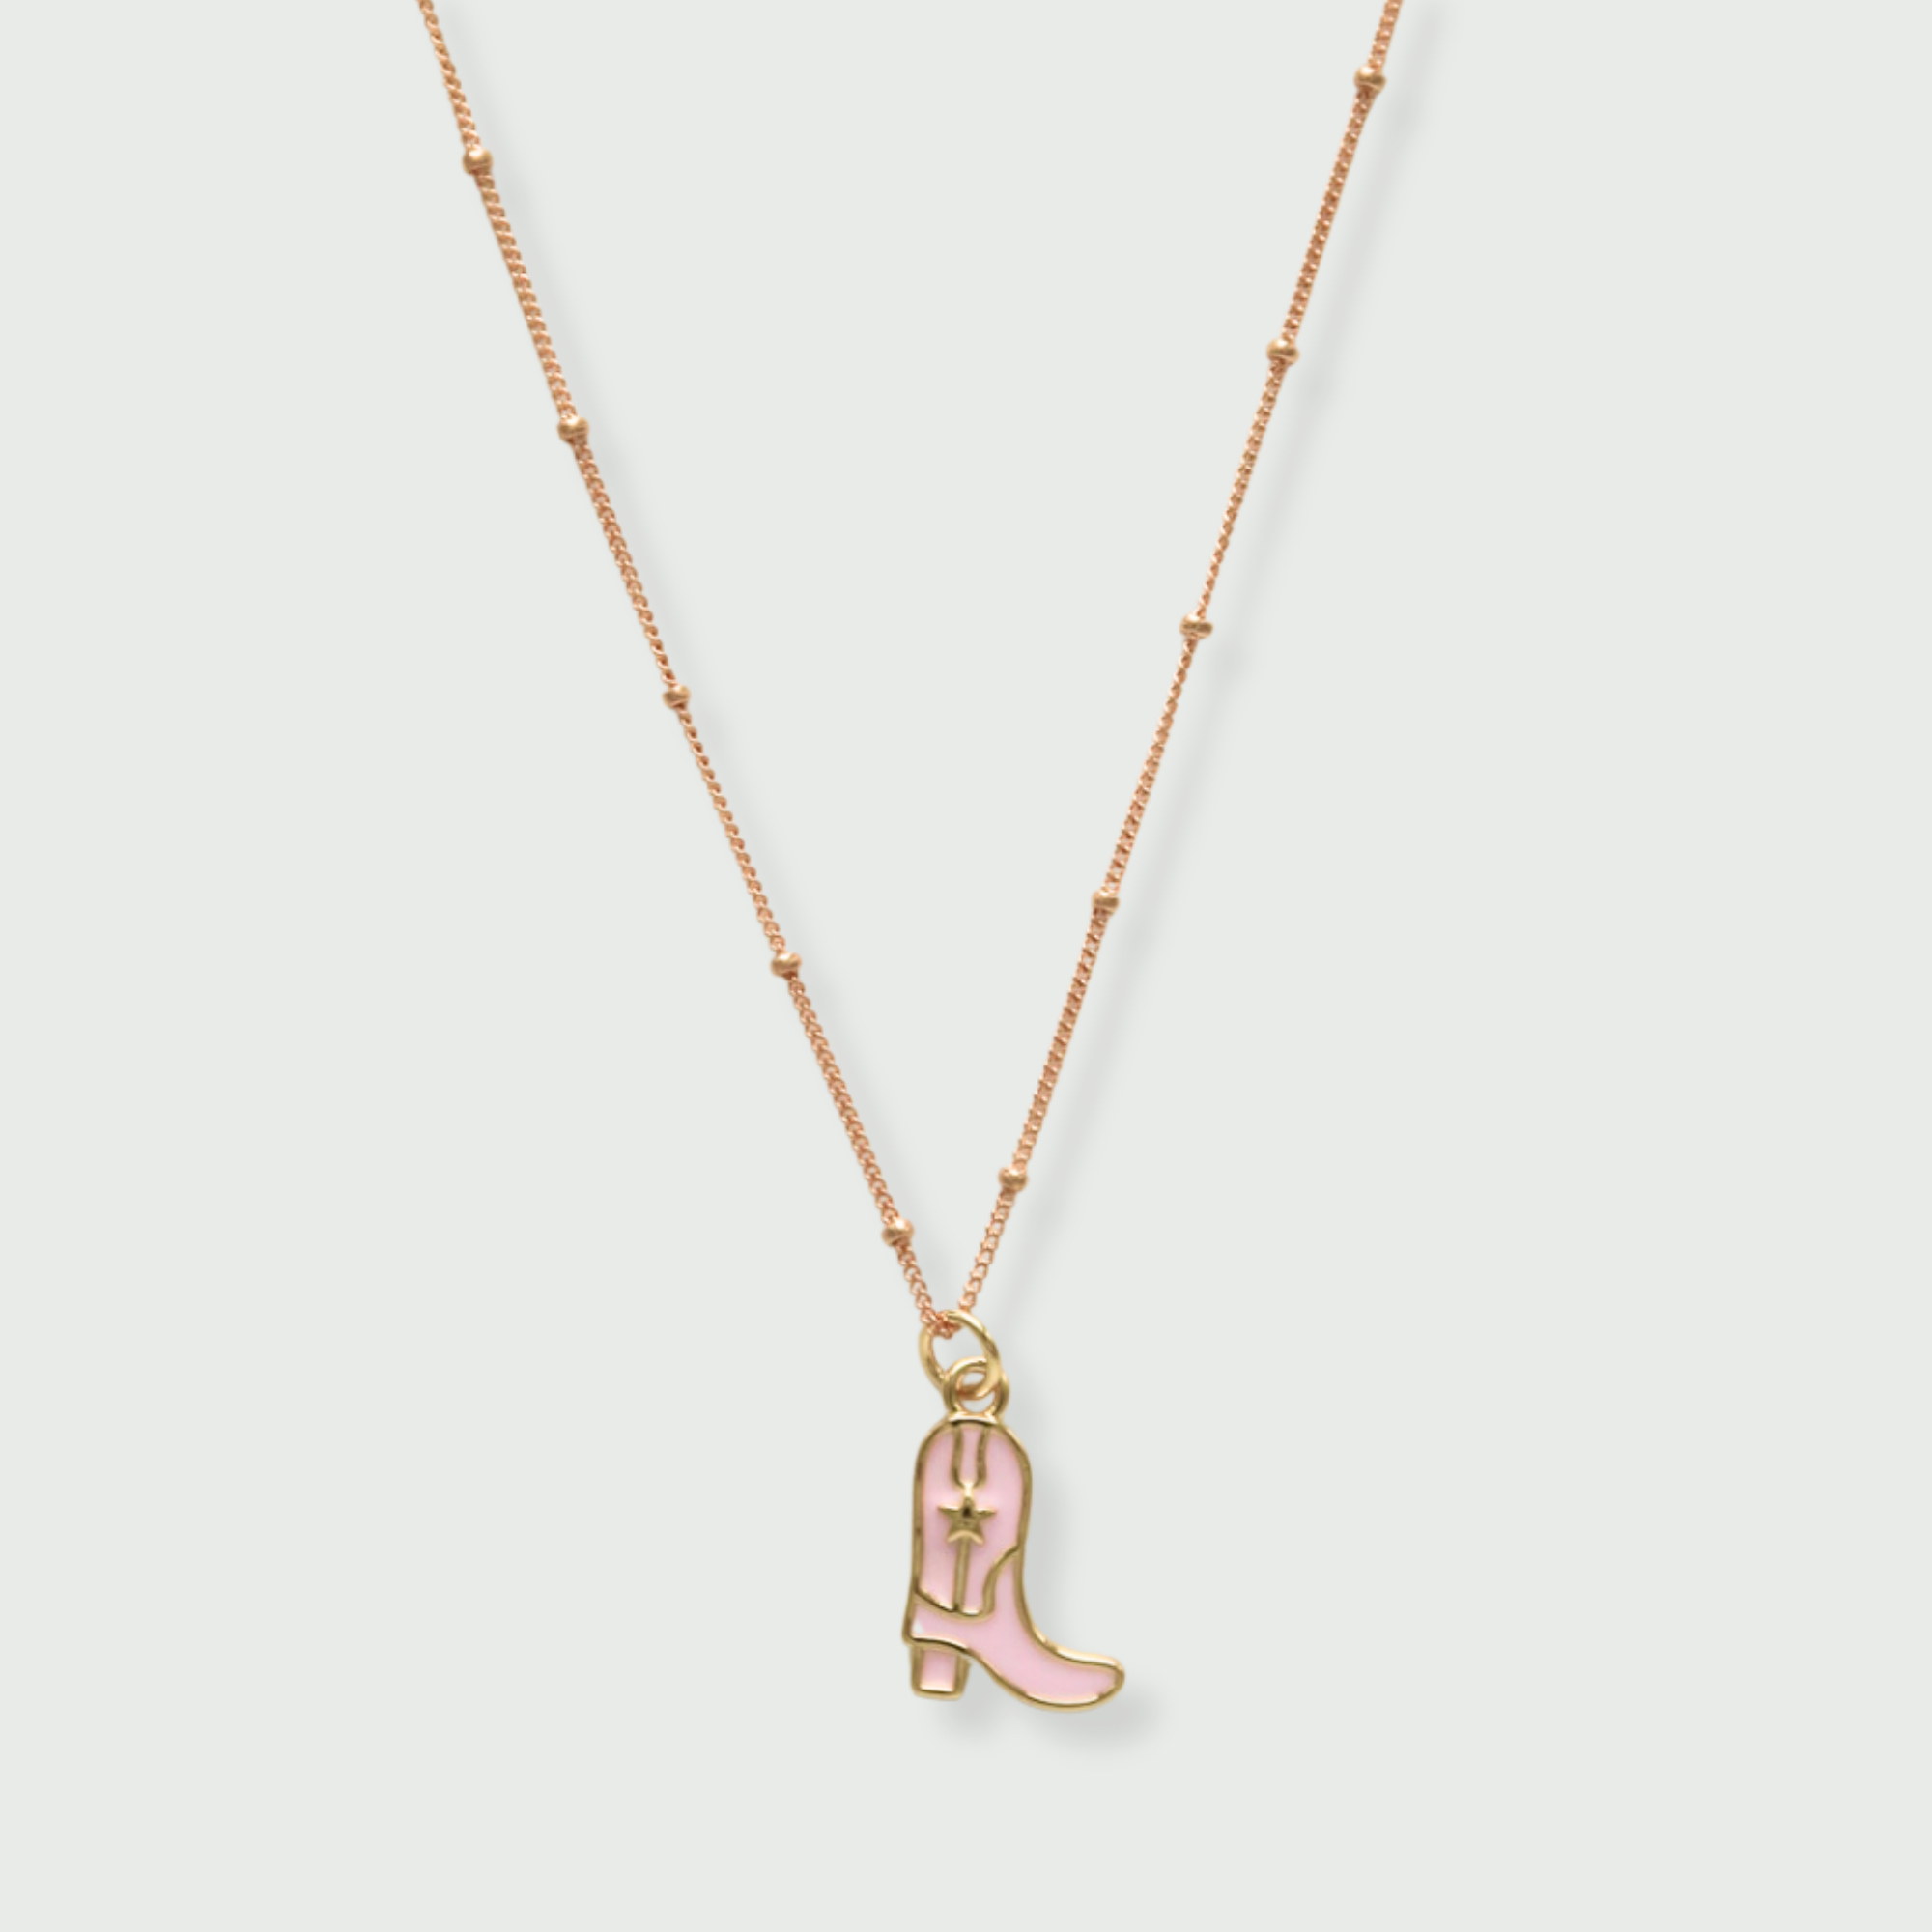 Pink Cowboy Boot Charm Necklace